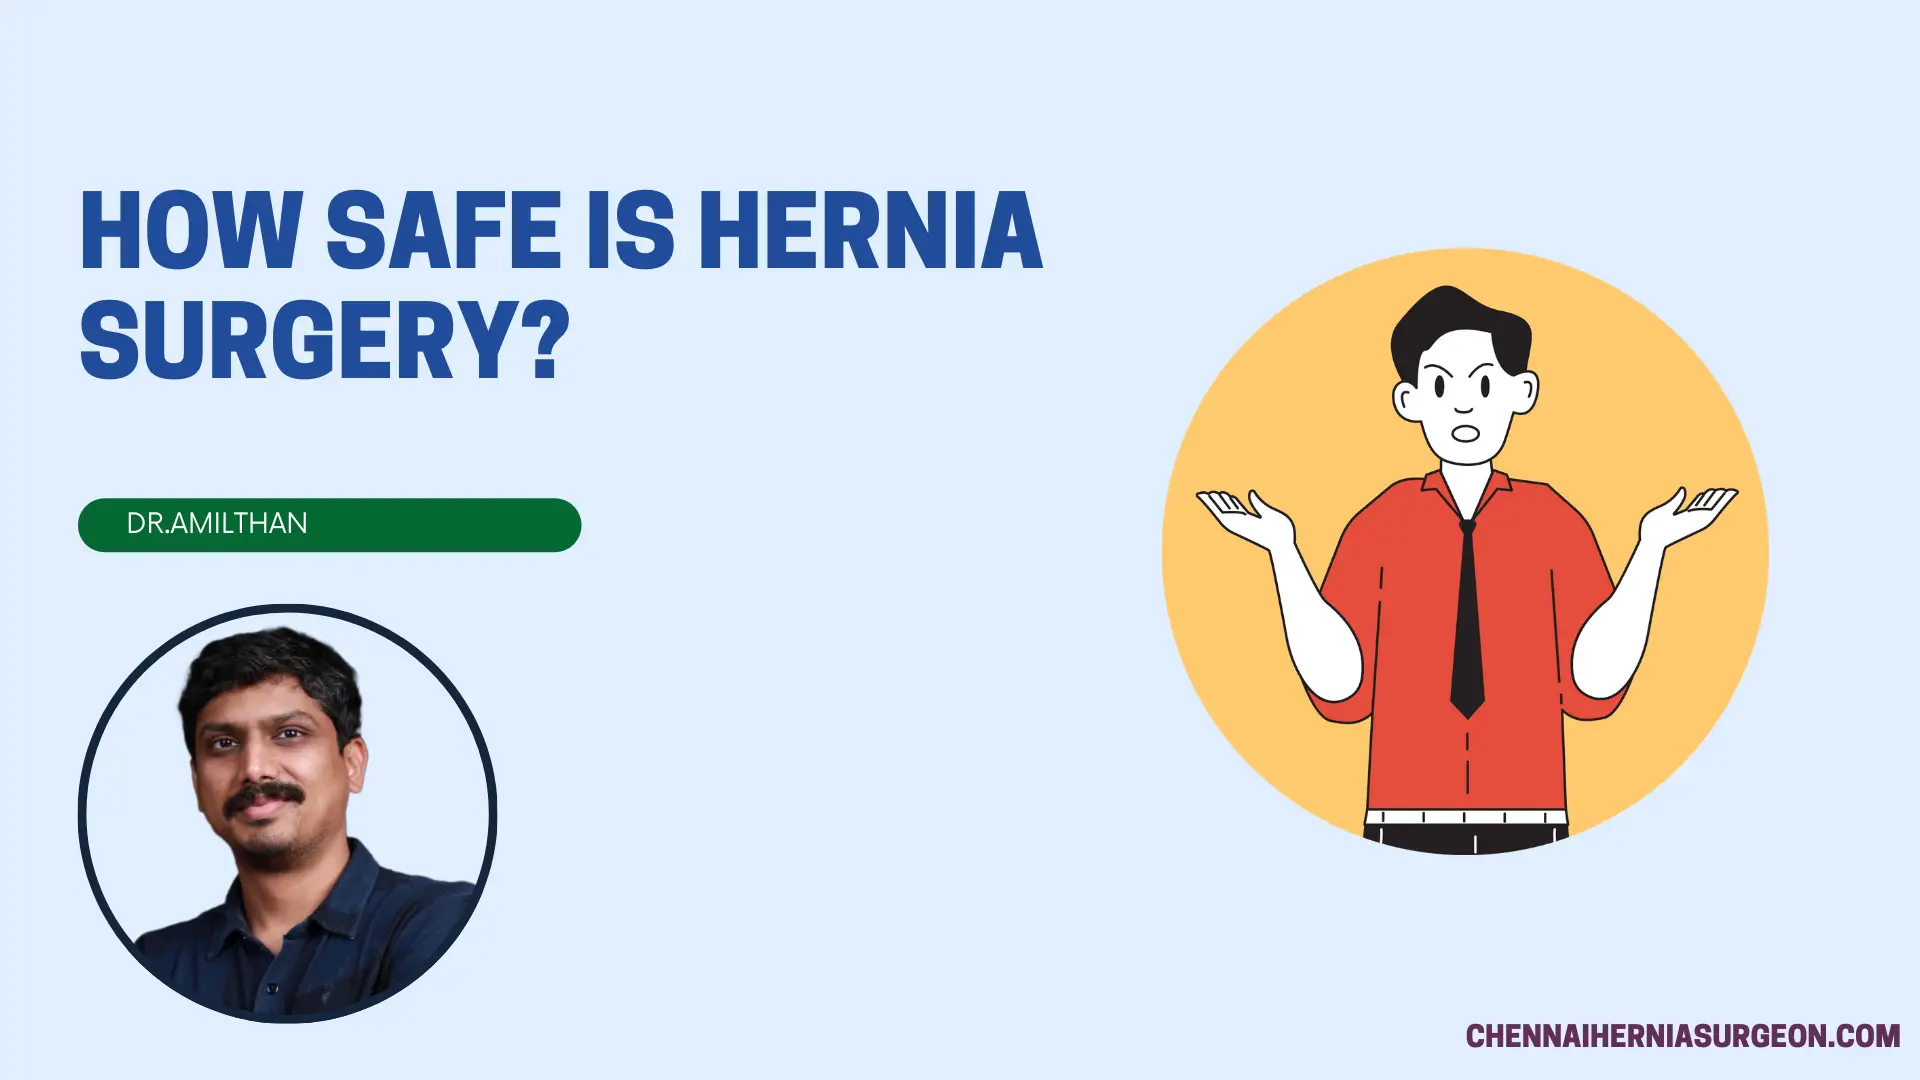 How Safe is Hernia Surgery